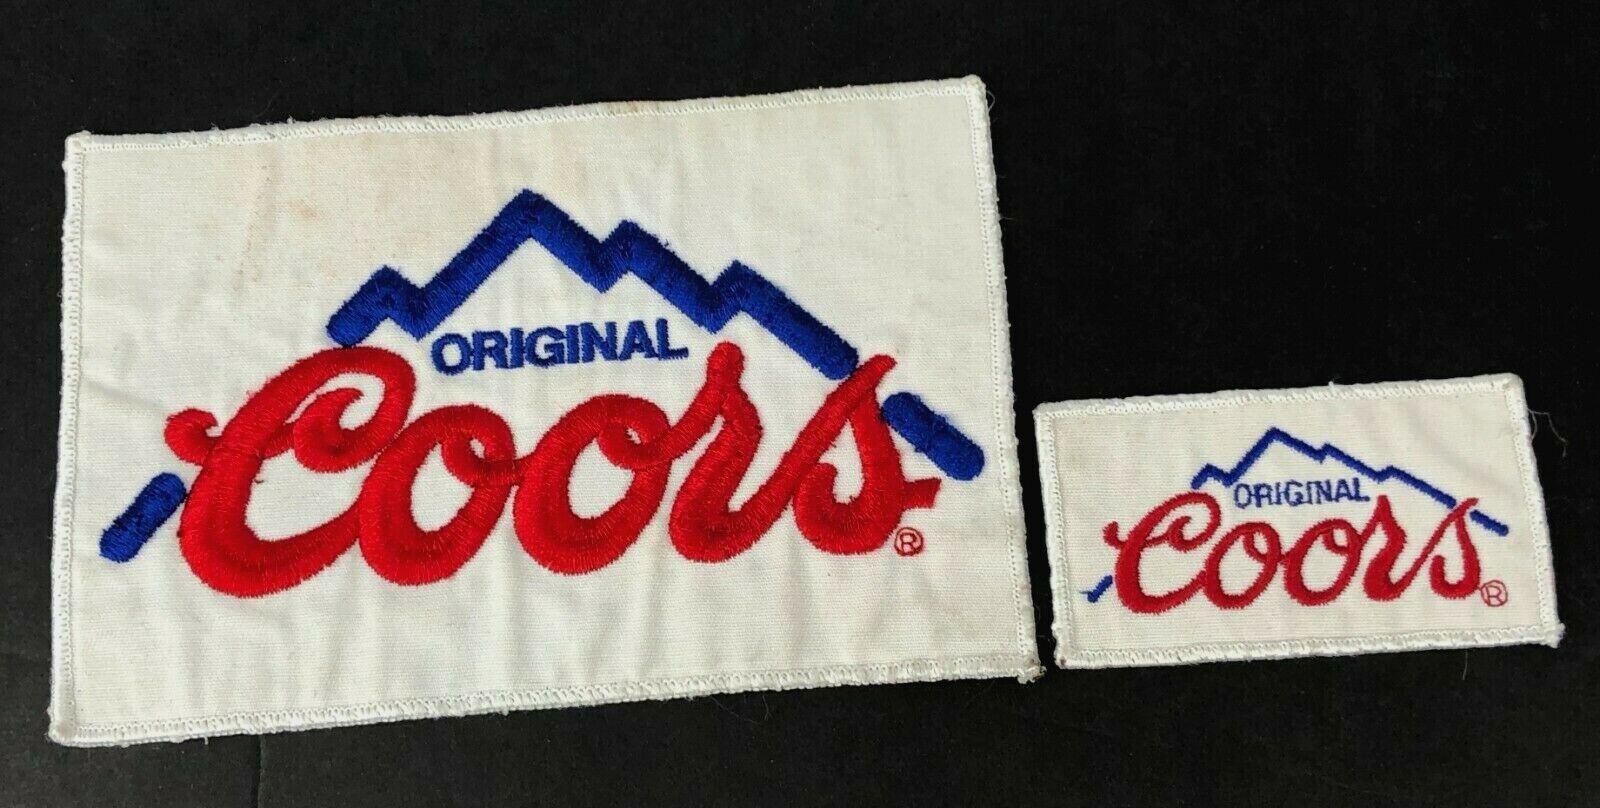 Lot Of 2: Original Coors Embroidered Sewn Iron-on Patches